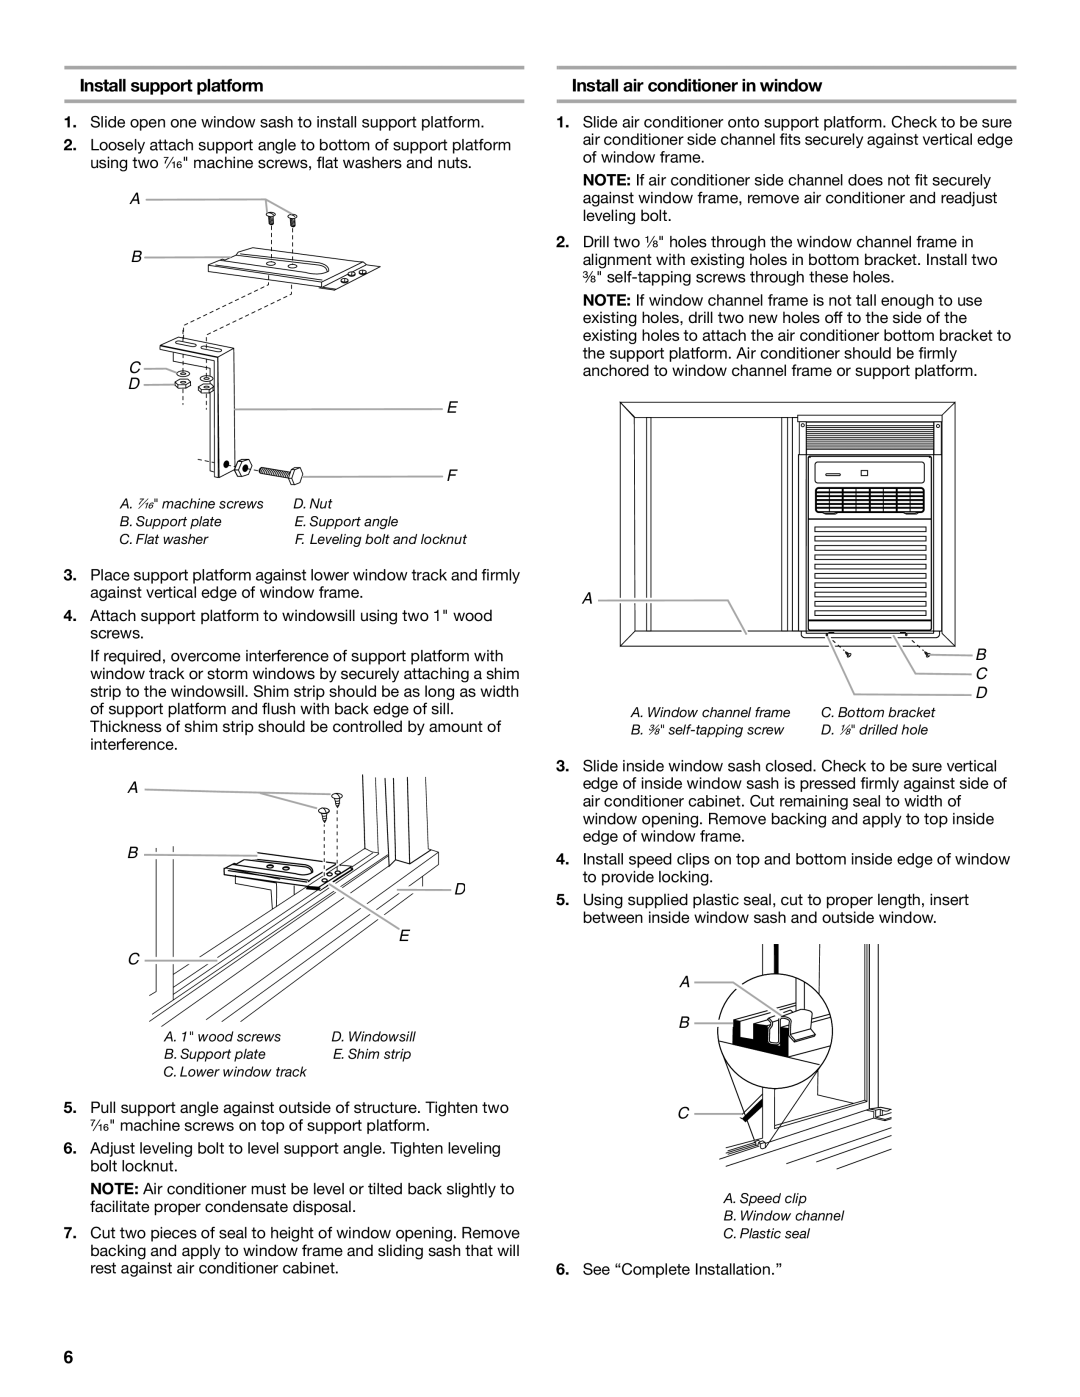 Whirlpool ACS088PR0 manual Install support platform, Install air conditioner in window, A B C D, A B D 